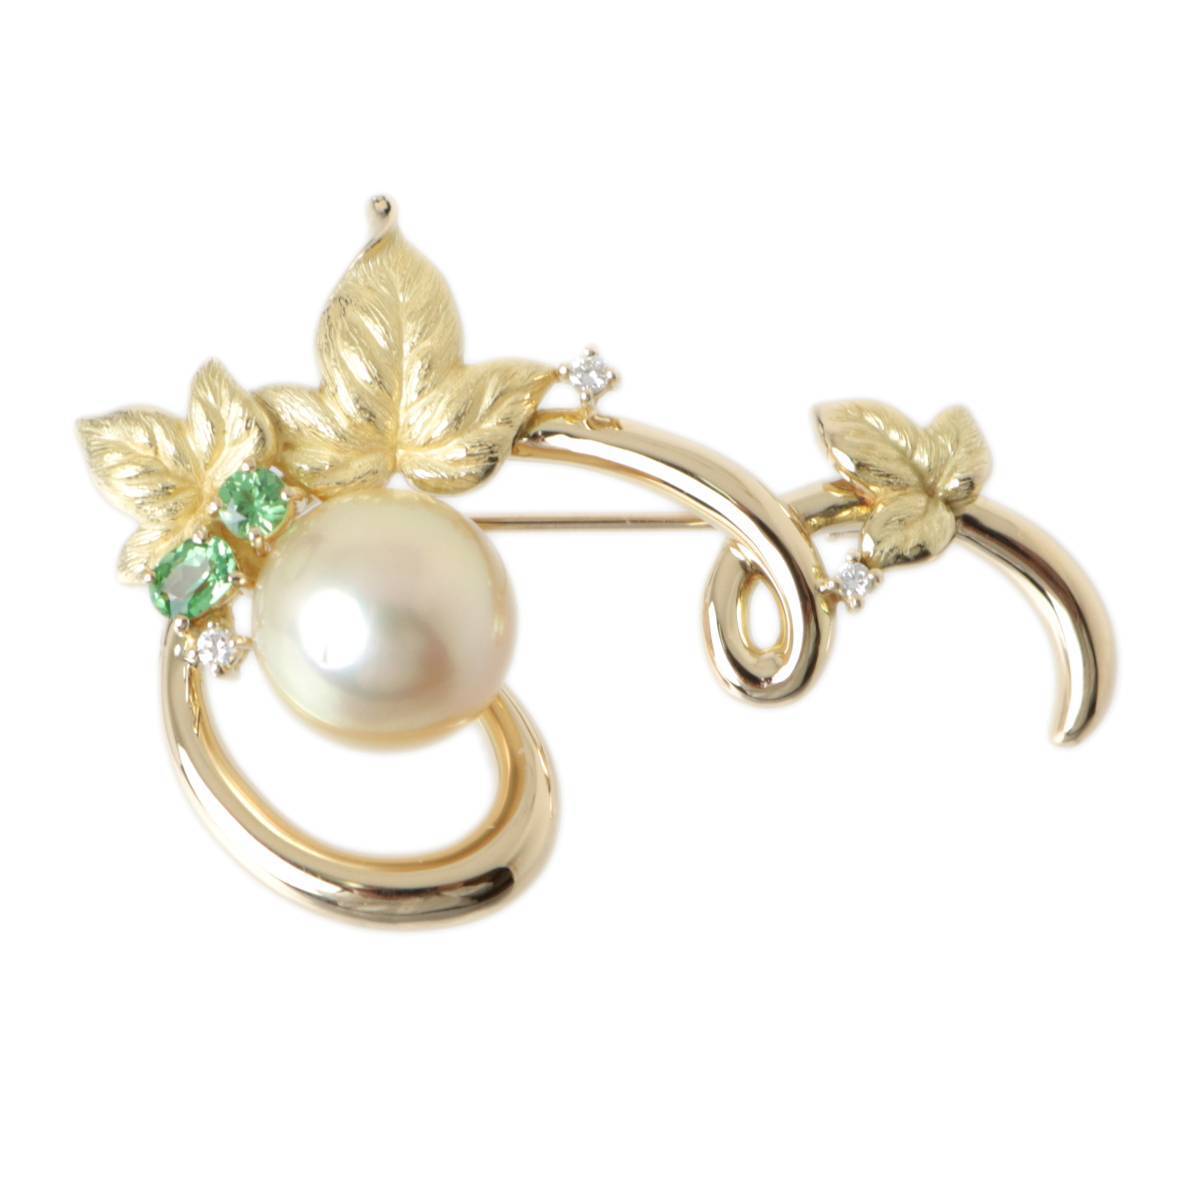 K18 Gold pearl design brooch pearl approximately )12mm diamond 0.05ct. line design gross weight 11.7gg burnishing up ending KS A rank 